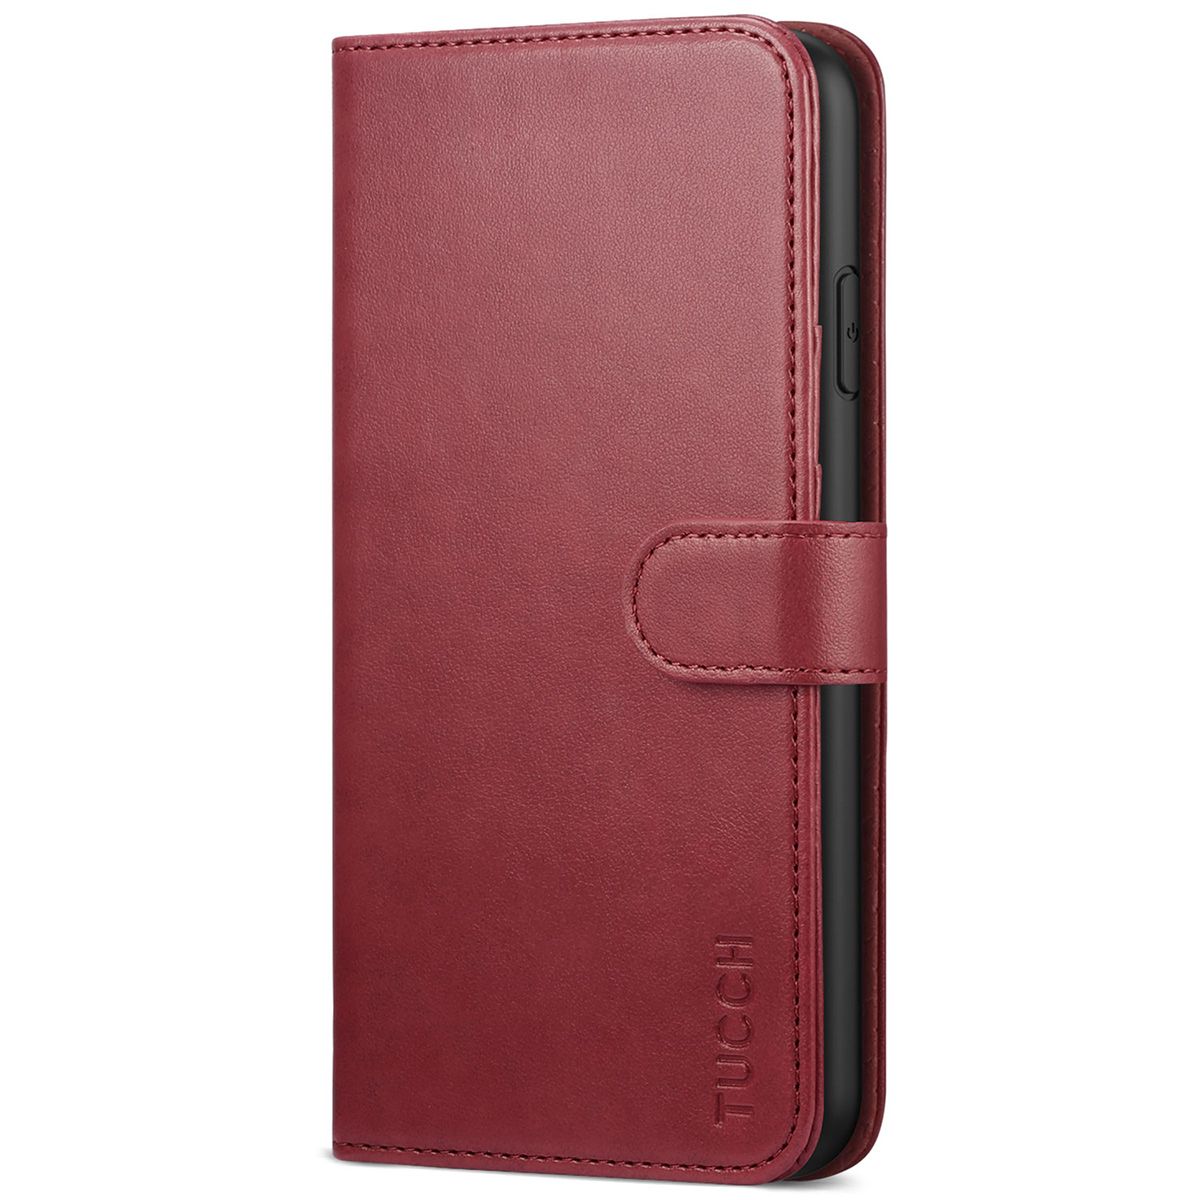 PU Leather Flip Cover Compatible with iPhone 11 Pro Elegant red Wallet Case for iPhone 11 Pro 